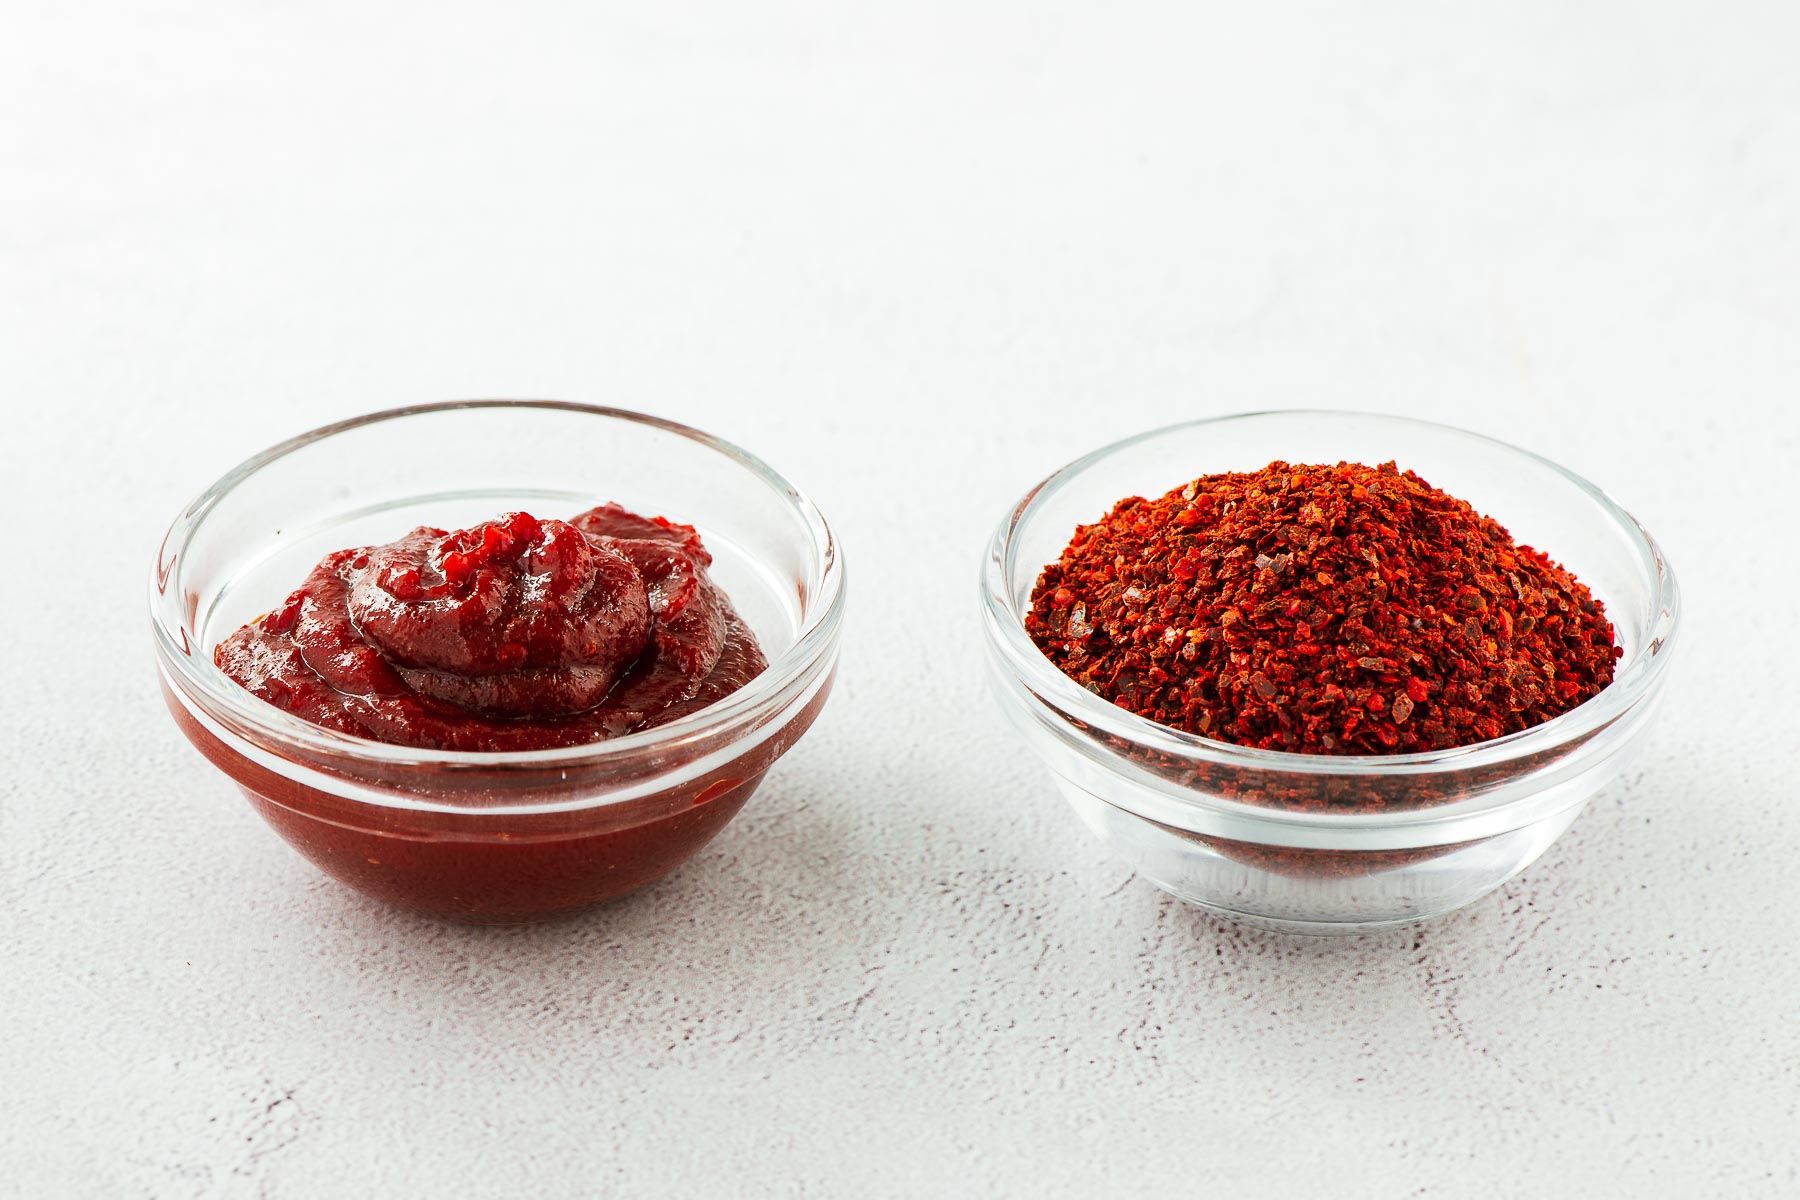 Gochugaru chilli flakes and gochujang paste in two small glass bowls on a concrete surface.